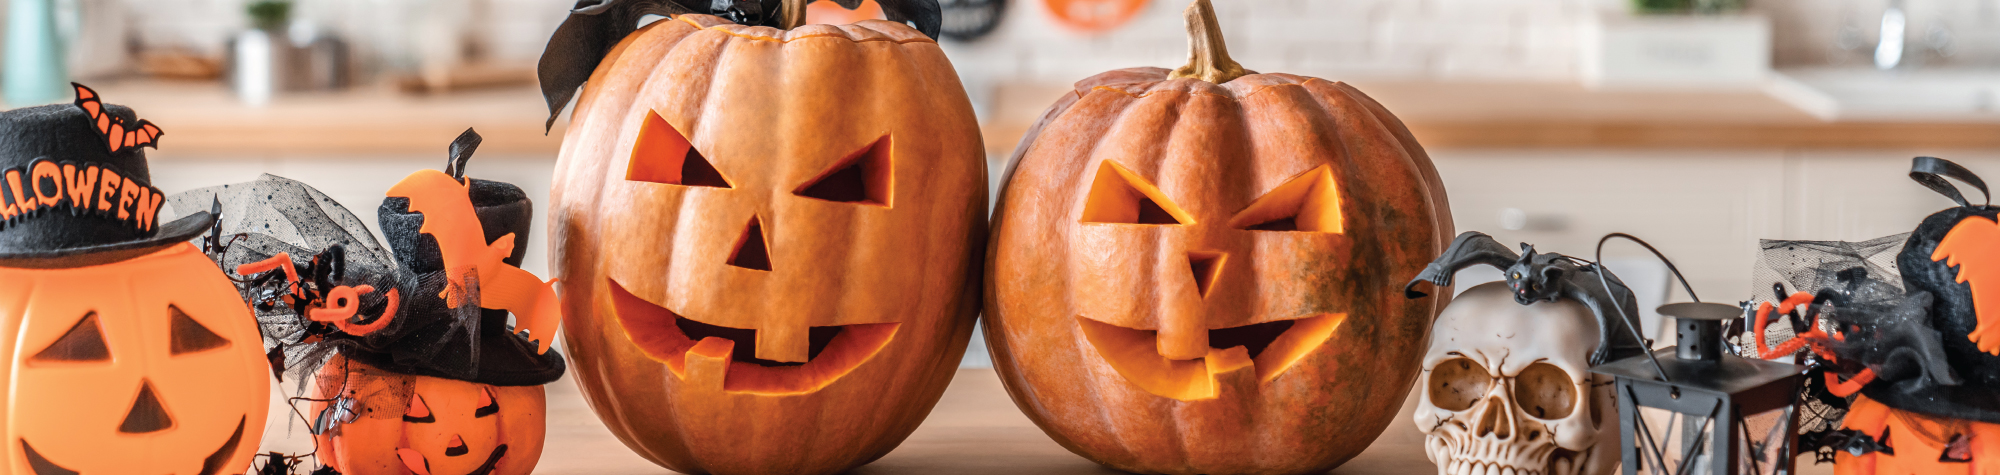 Halloween Decorating Safety Tips You Need to Know